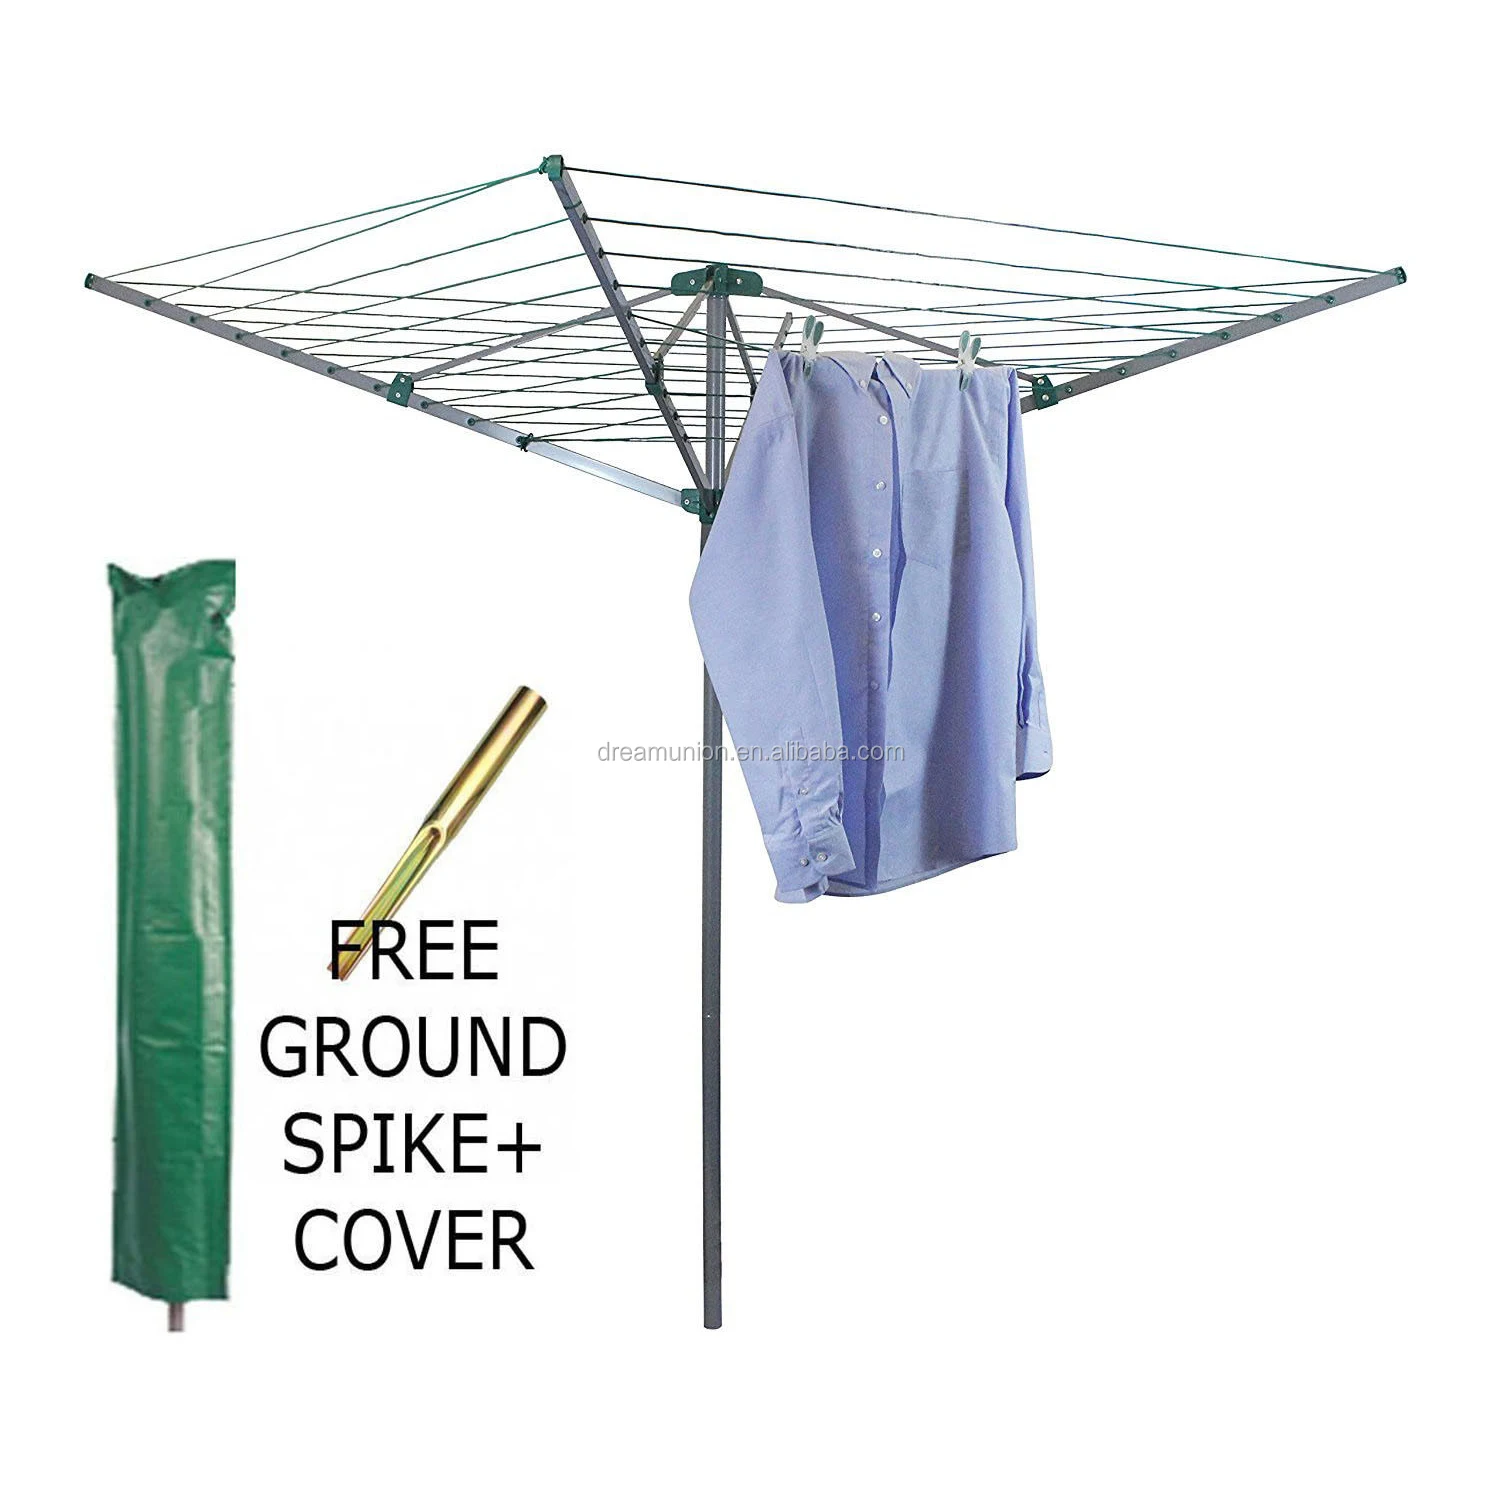 40m Rotary Clothes Airer Washing Line Steel Frame 4-Arms Garden Laundry Dryer 